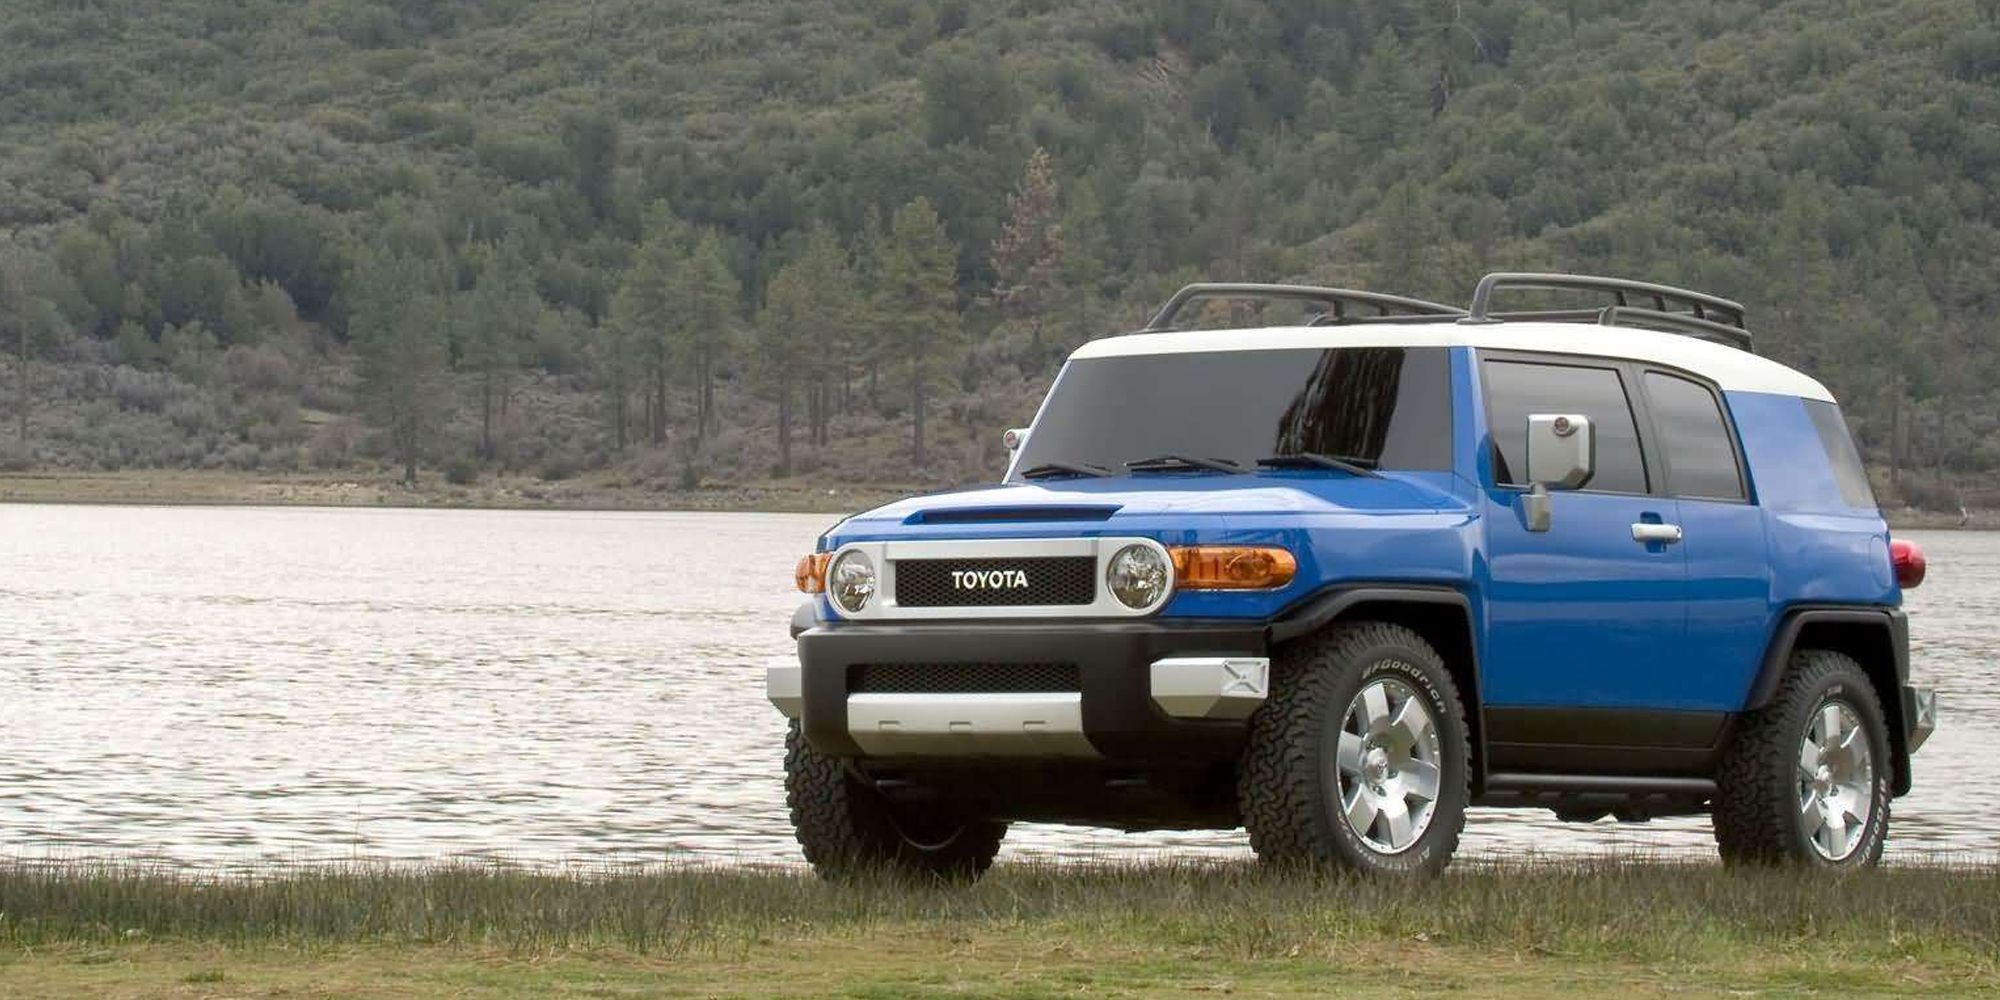 Front 3/4 view of an FJ Cruiser next to a shore, driver's side